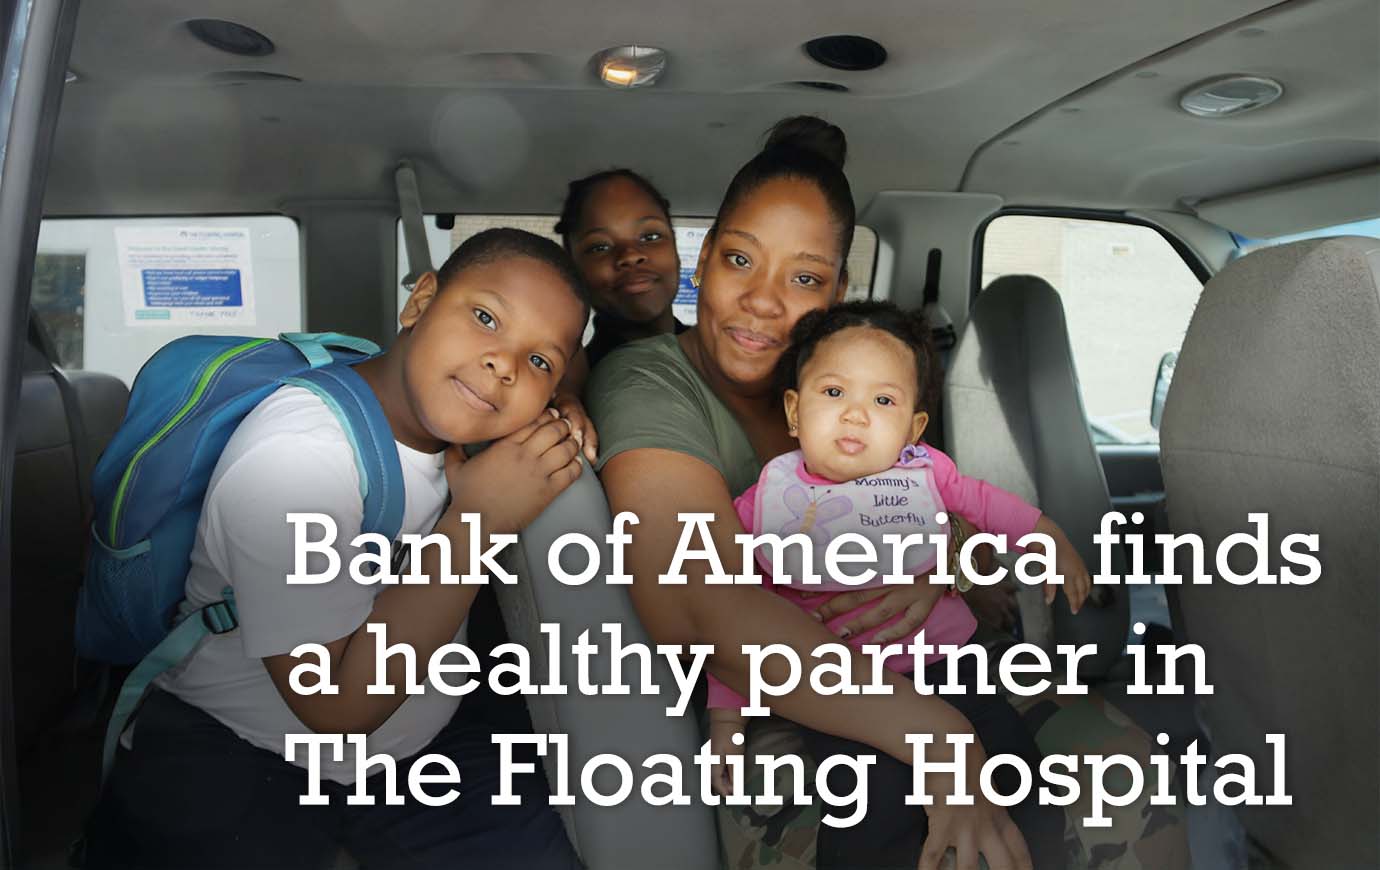 Bank of America finds a healthy partner in The Floating Hospital, showing a family in one of the hospital's vans.